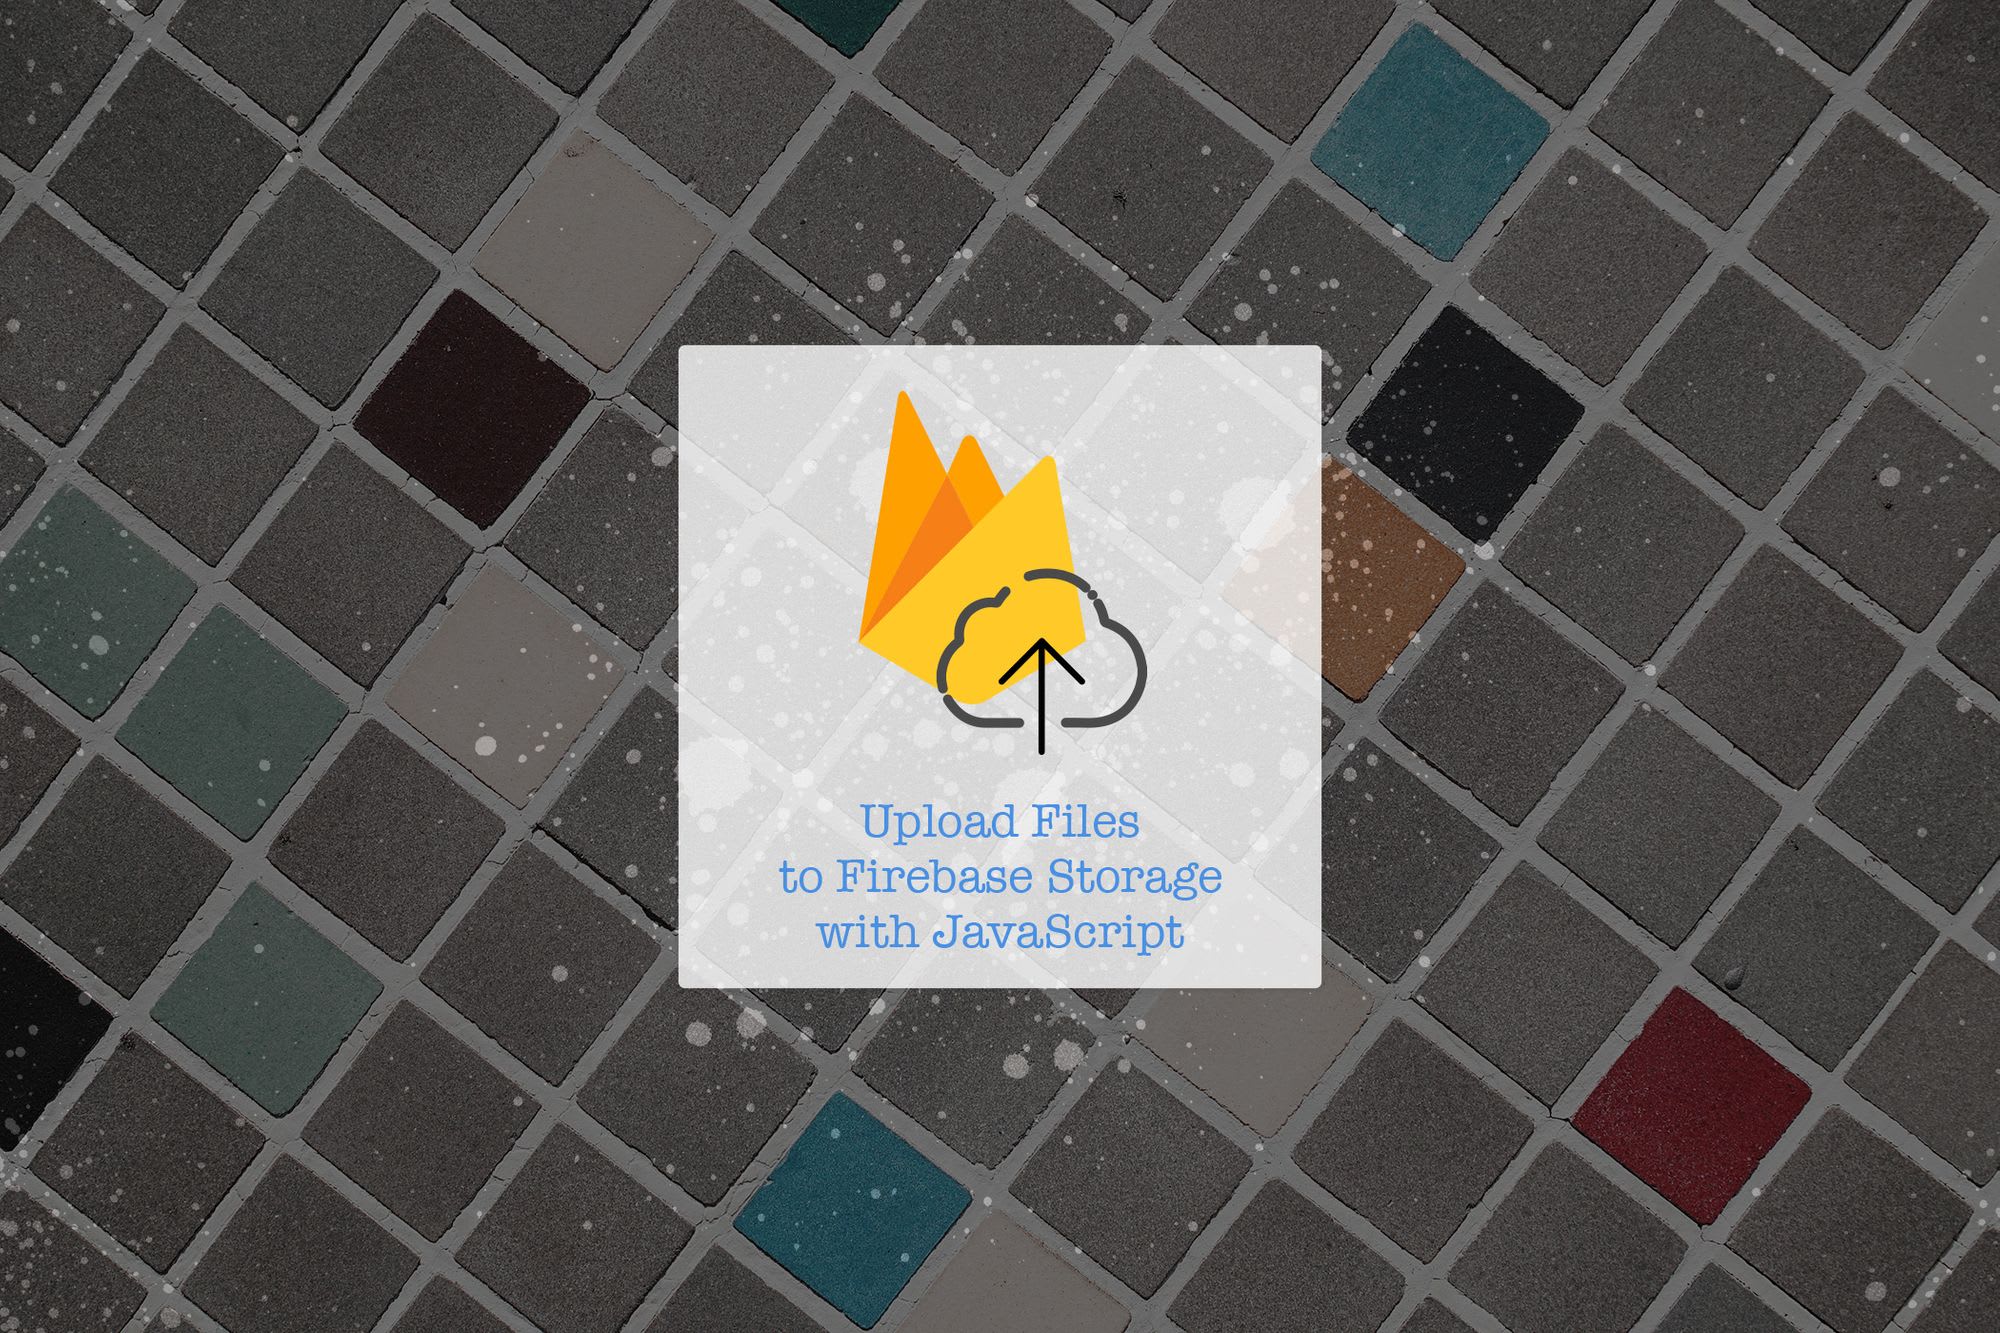 Upload Files to Firebase Storage with JavaScript